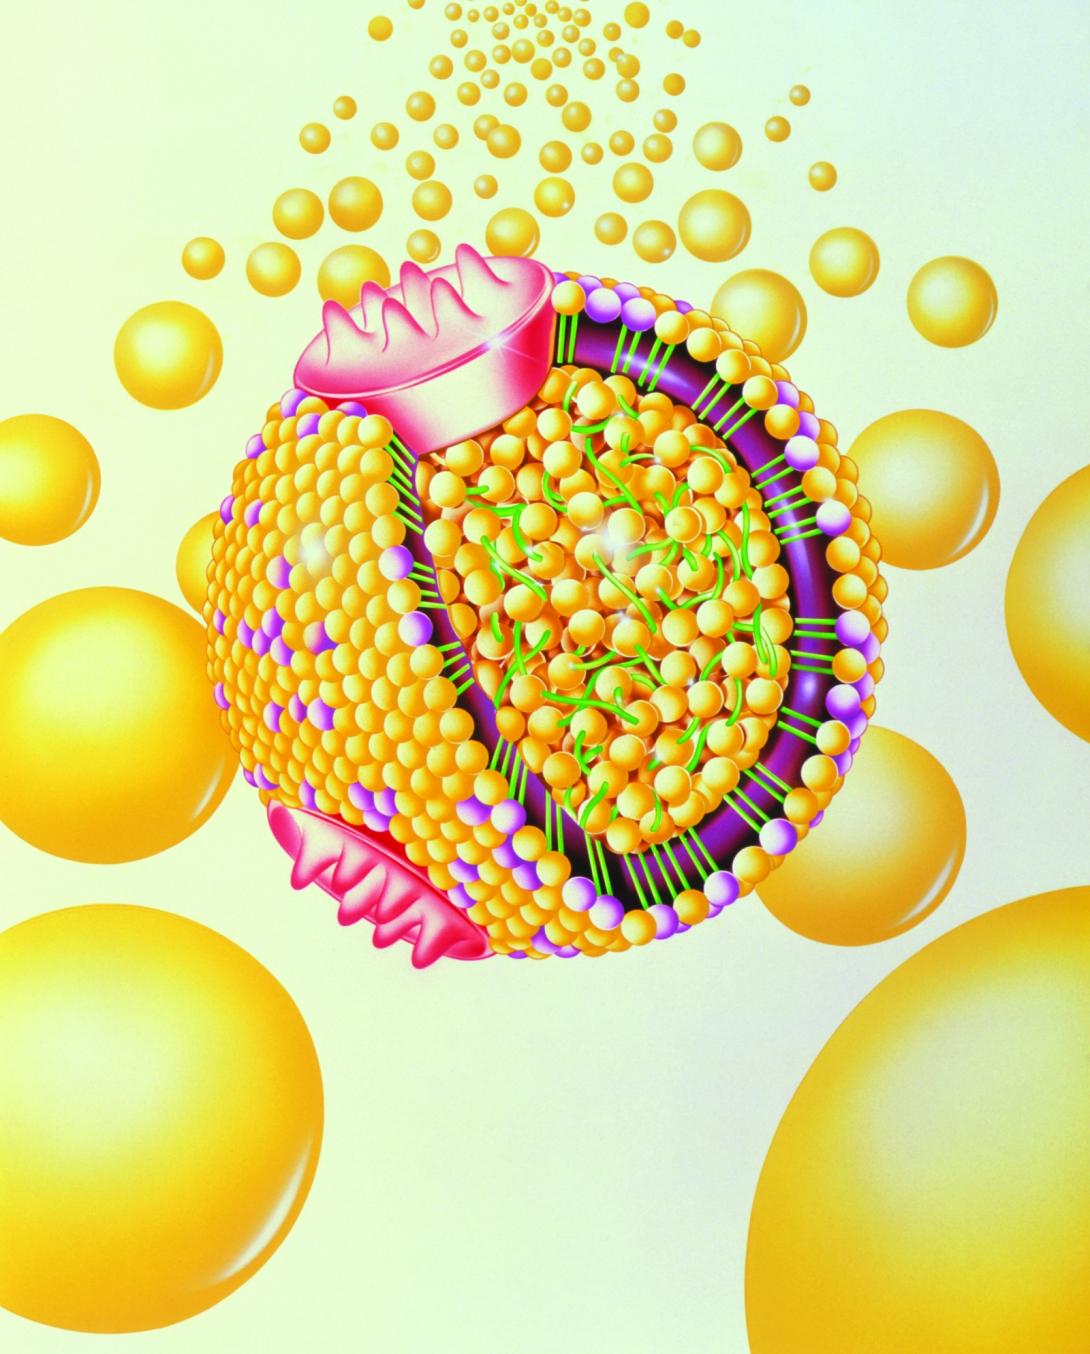 A drawing of a yellow low-density lipoprotein